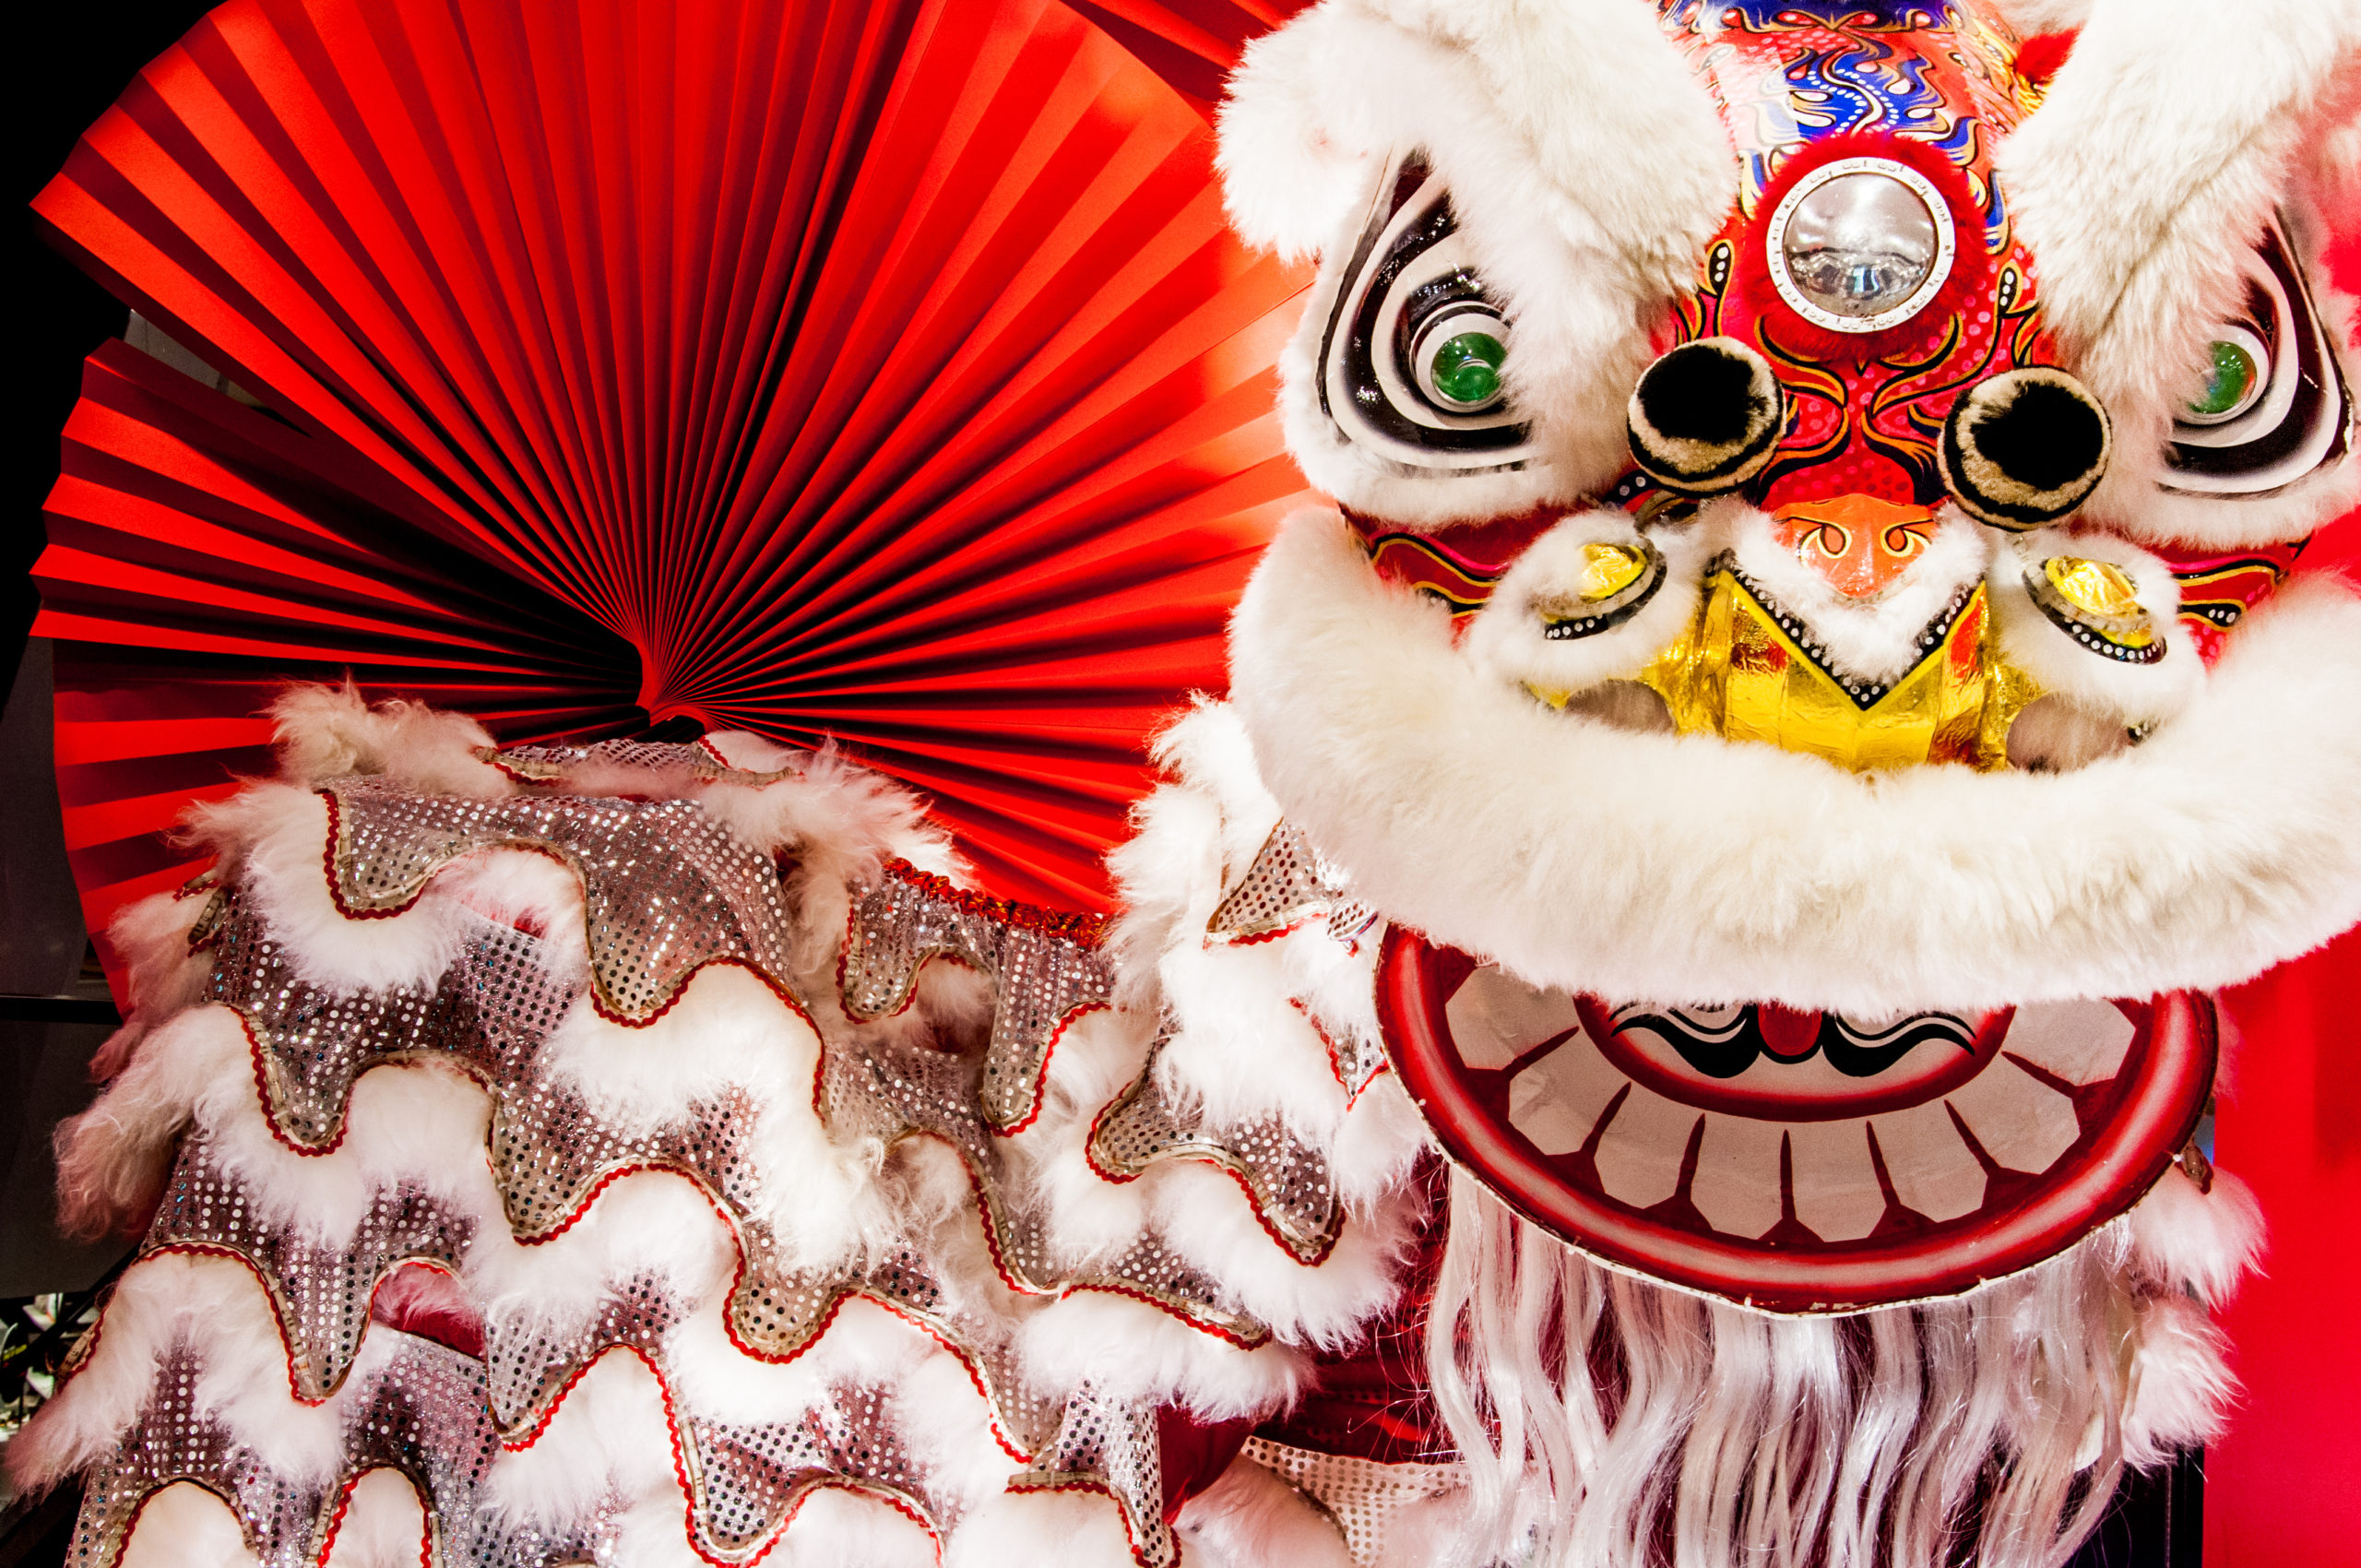 Chinese New Year lion dances and performances in Kuala Lumpur